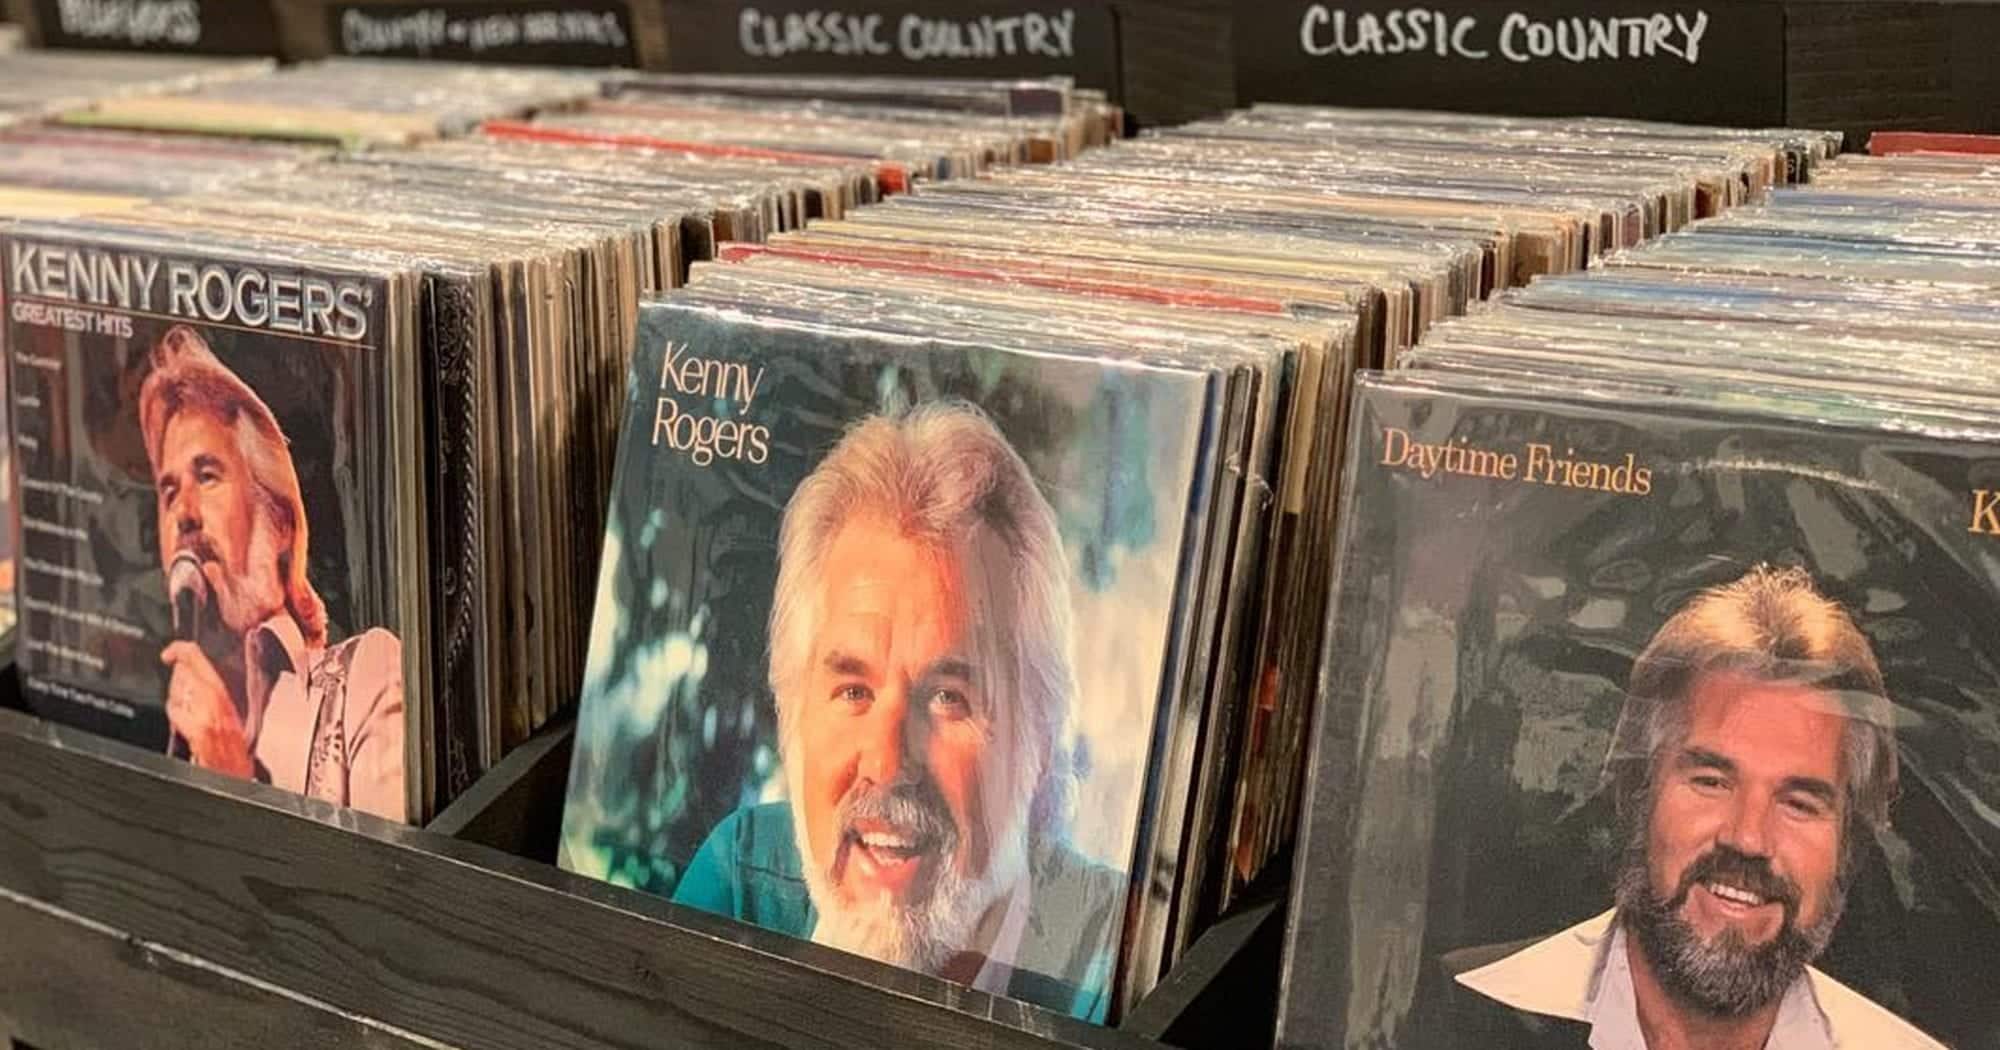 25 Best Kenny Rogers Songs Music History